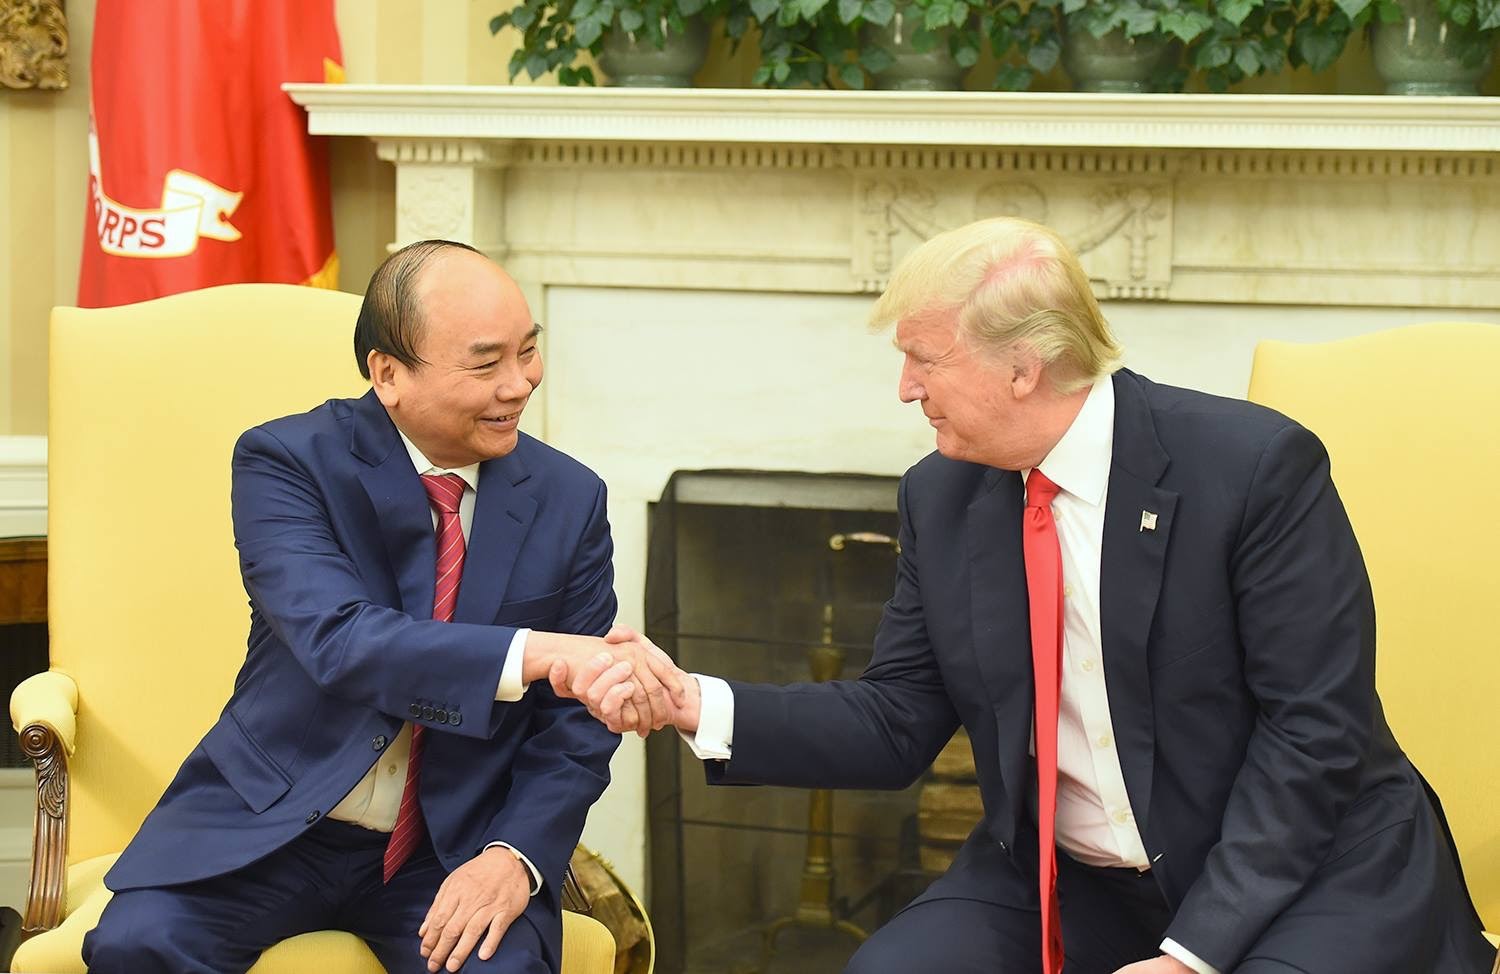 Prime Minister Nguyen Xuan Phuc's meeting with President Donald Trump: a memory